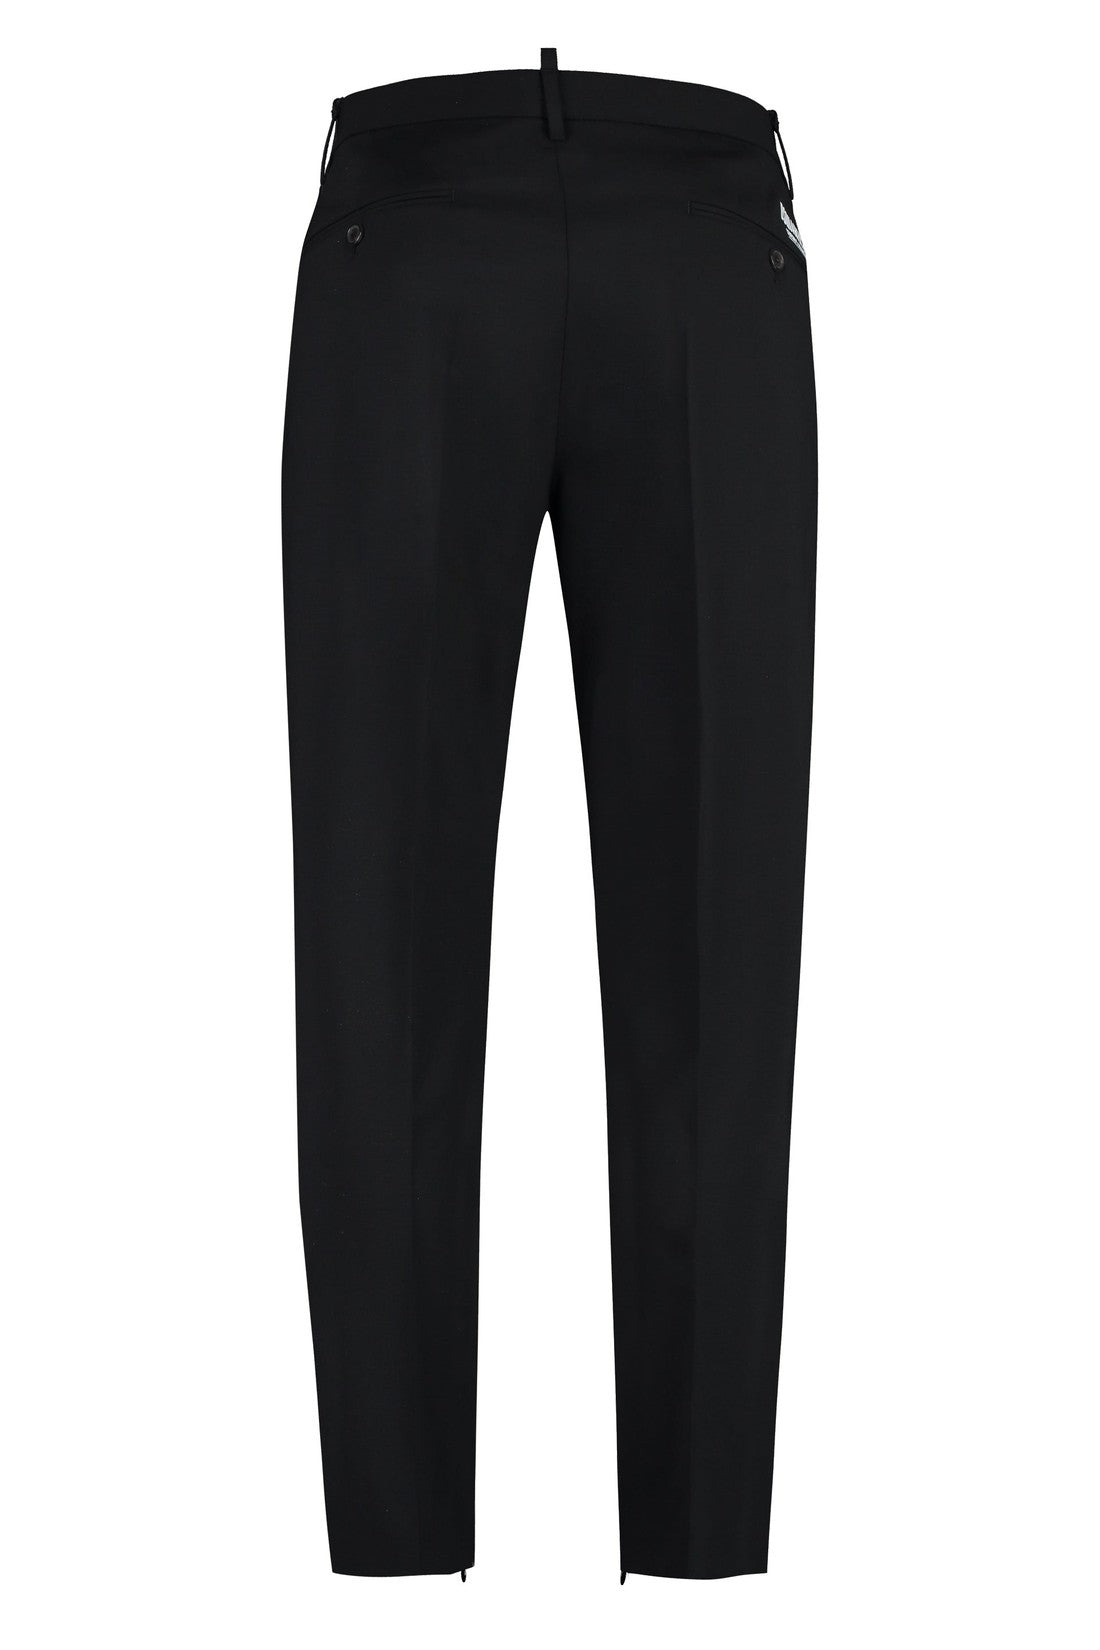 Dsquared2-OUTLET-SALE-Wool trousers-ARCHIVIST